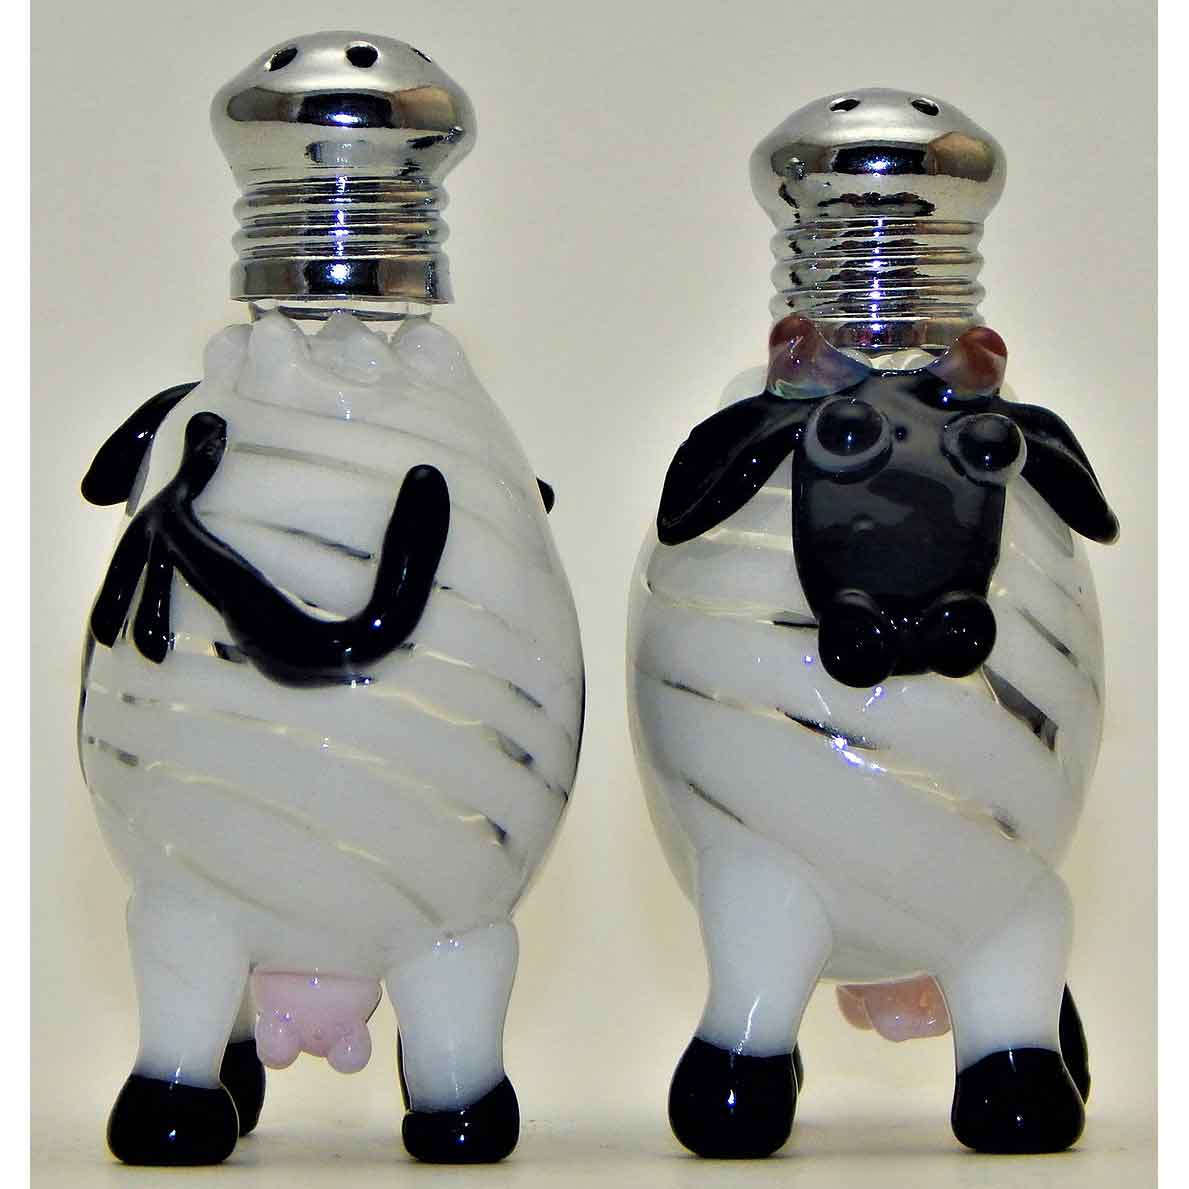 Cows Blown Glass Salt and Pepper Shaker 260 by Four Sisters Art Glass